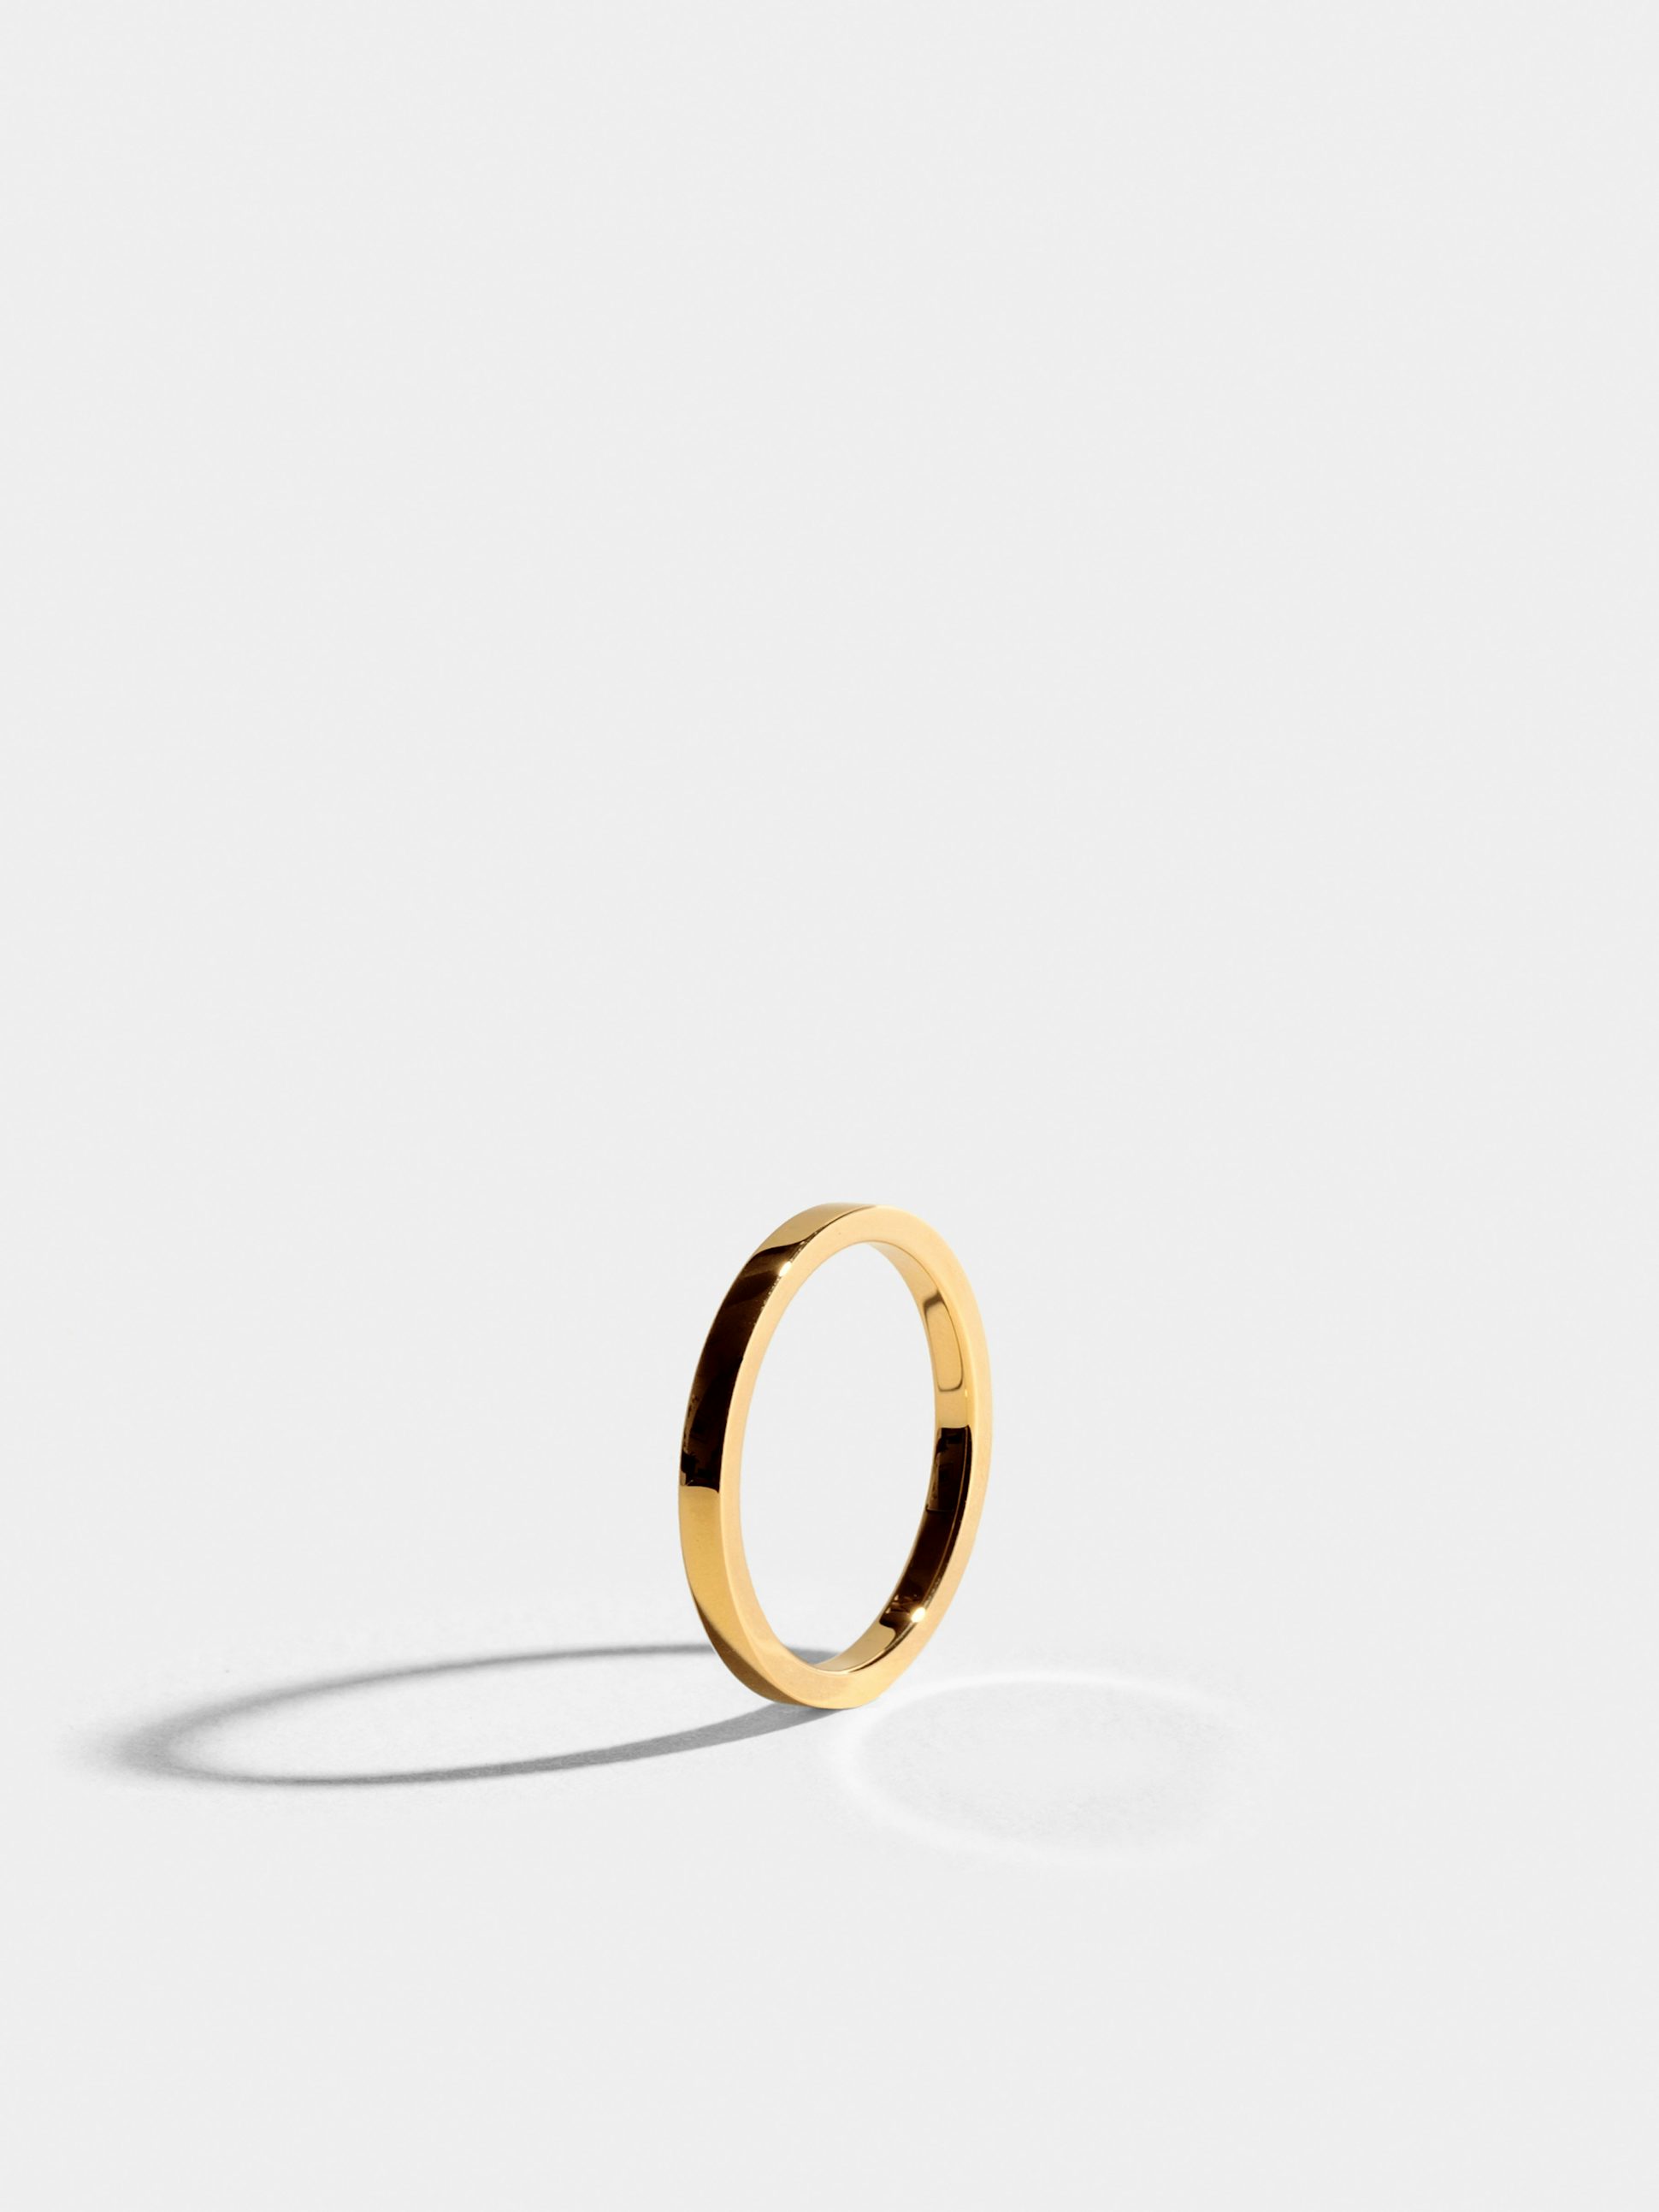 Anagramme flat ribbon ring in 18k Fairmined ethical yellow gold